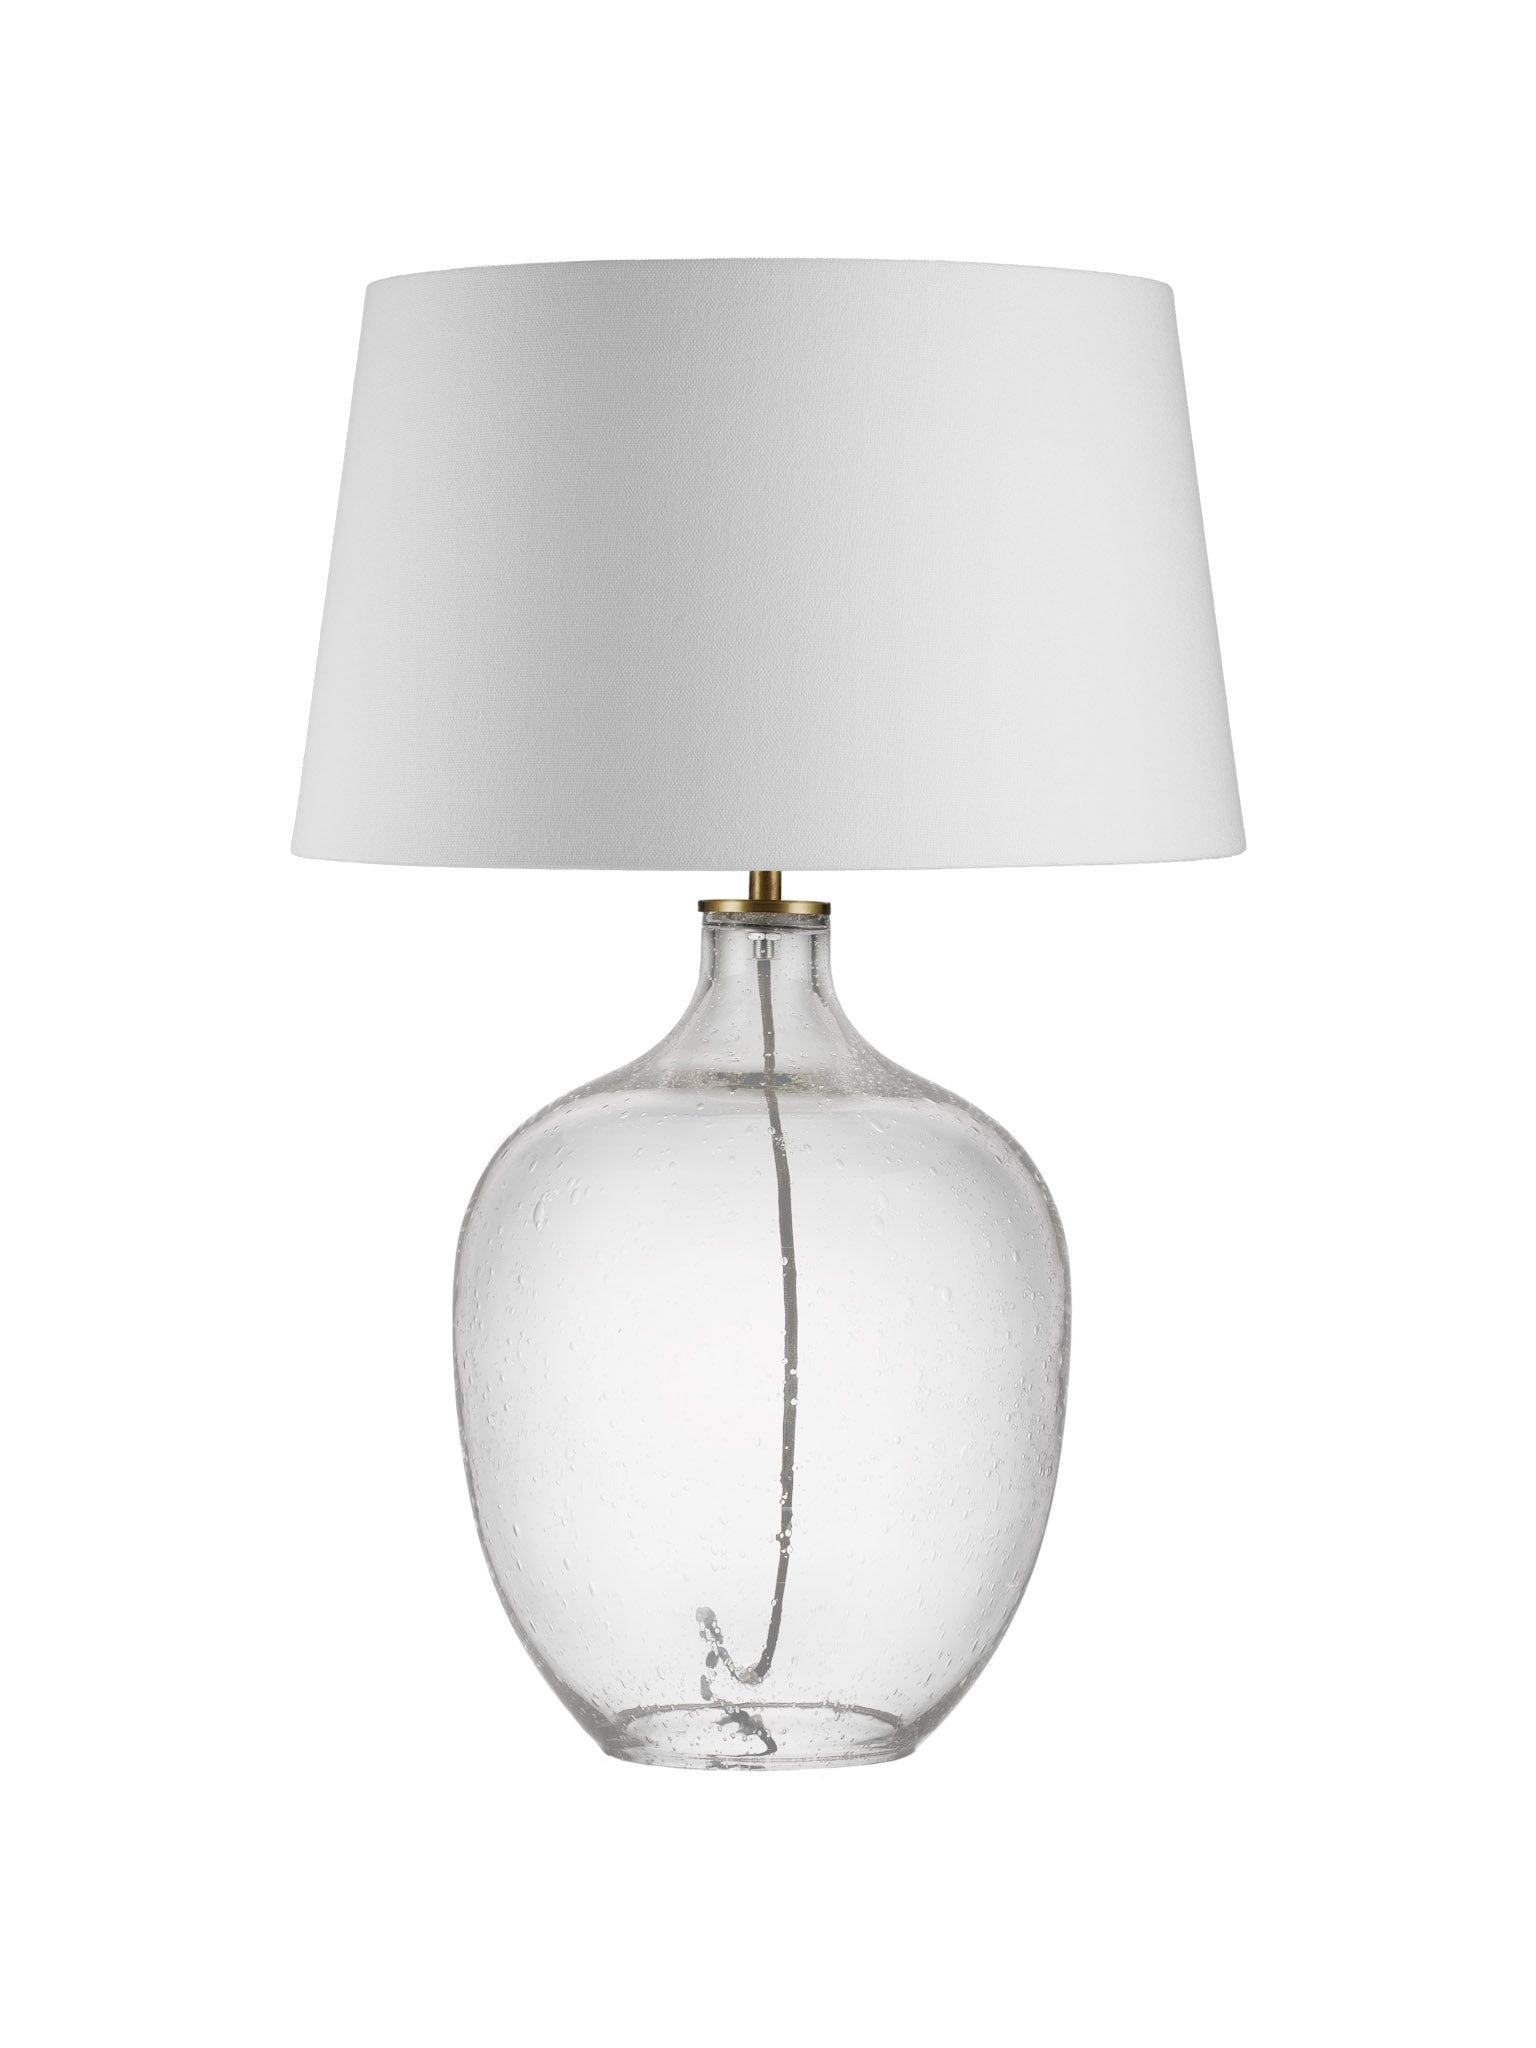 glass bubble table lamp with white taper shade